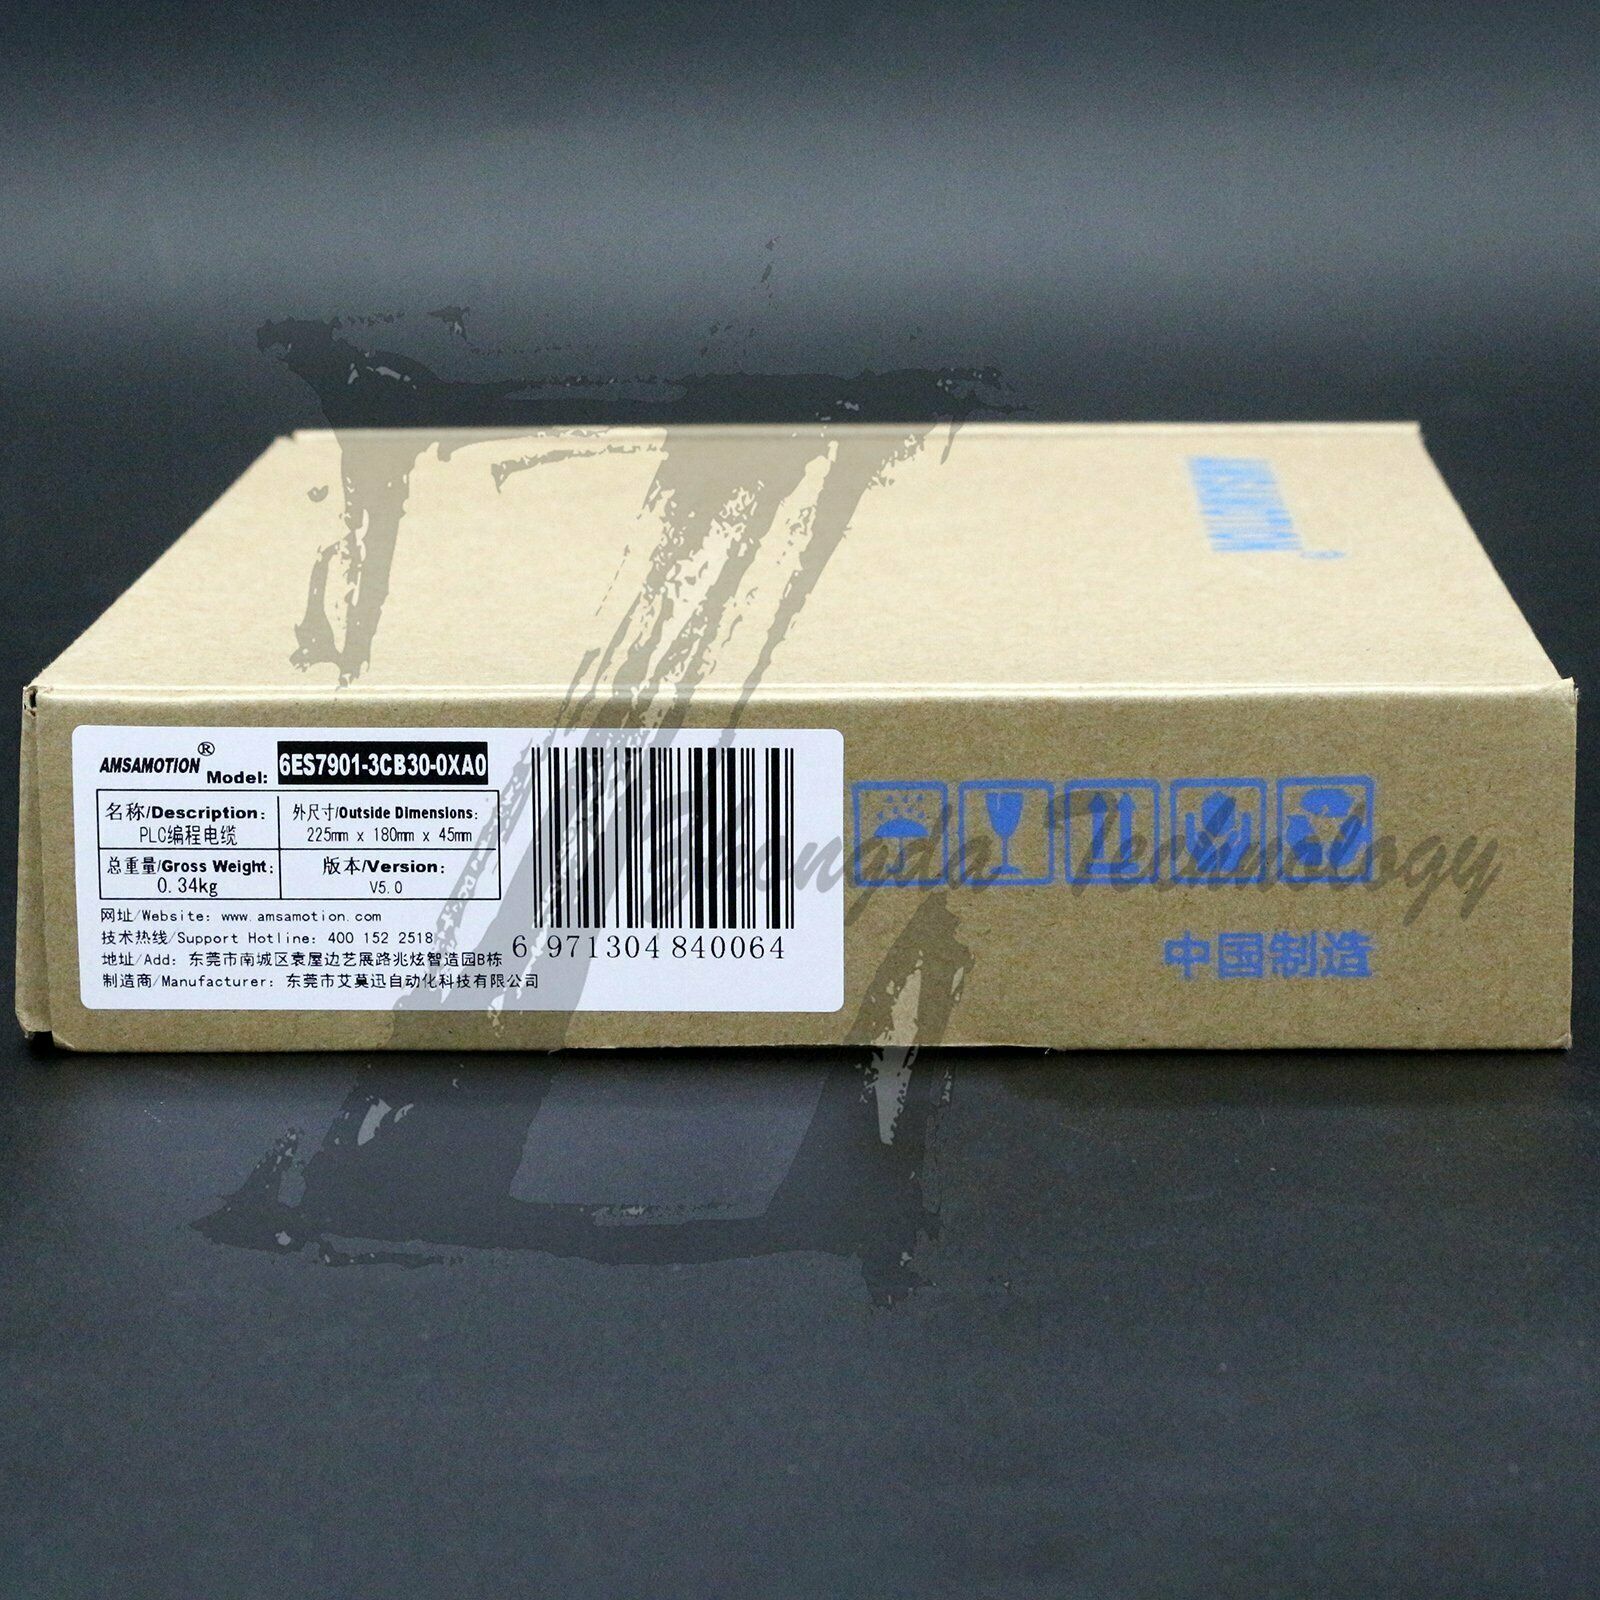 1PCS New Emerson Suitable for SIEMENS 6ES7 901-3CB30-0XA0 One year warranty KOEED 1, 90%, import_2020_10_10_031751, Other, Siemens